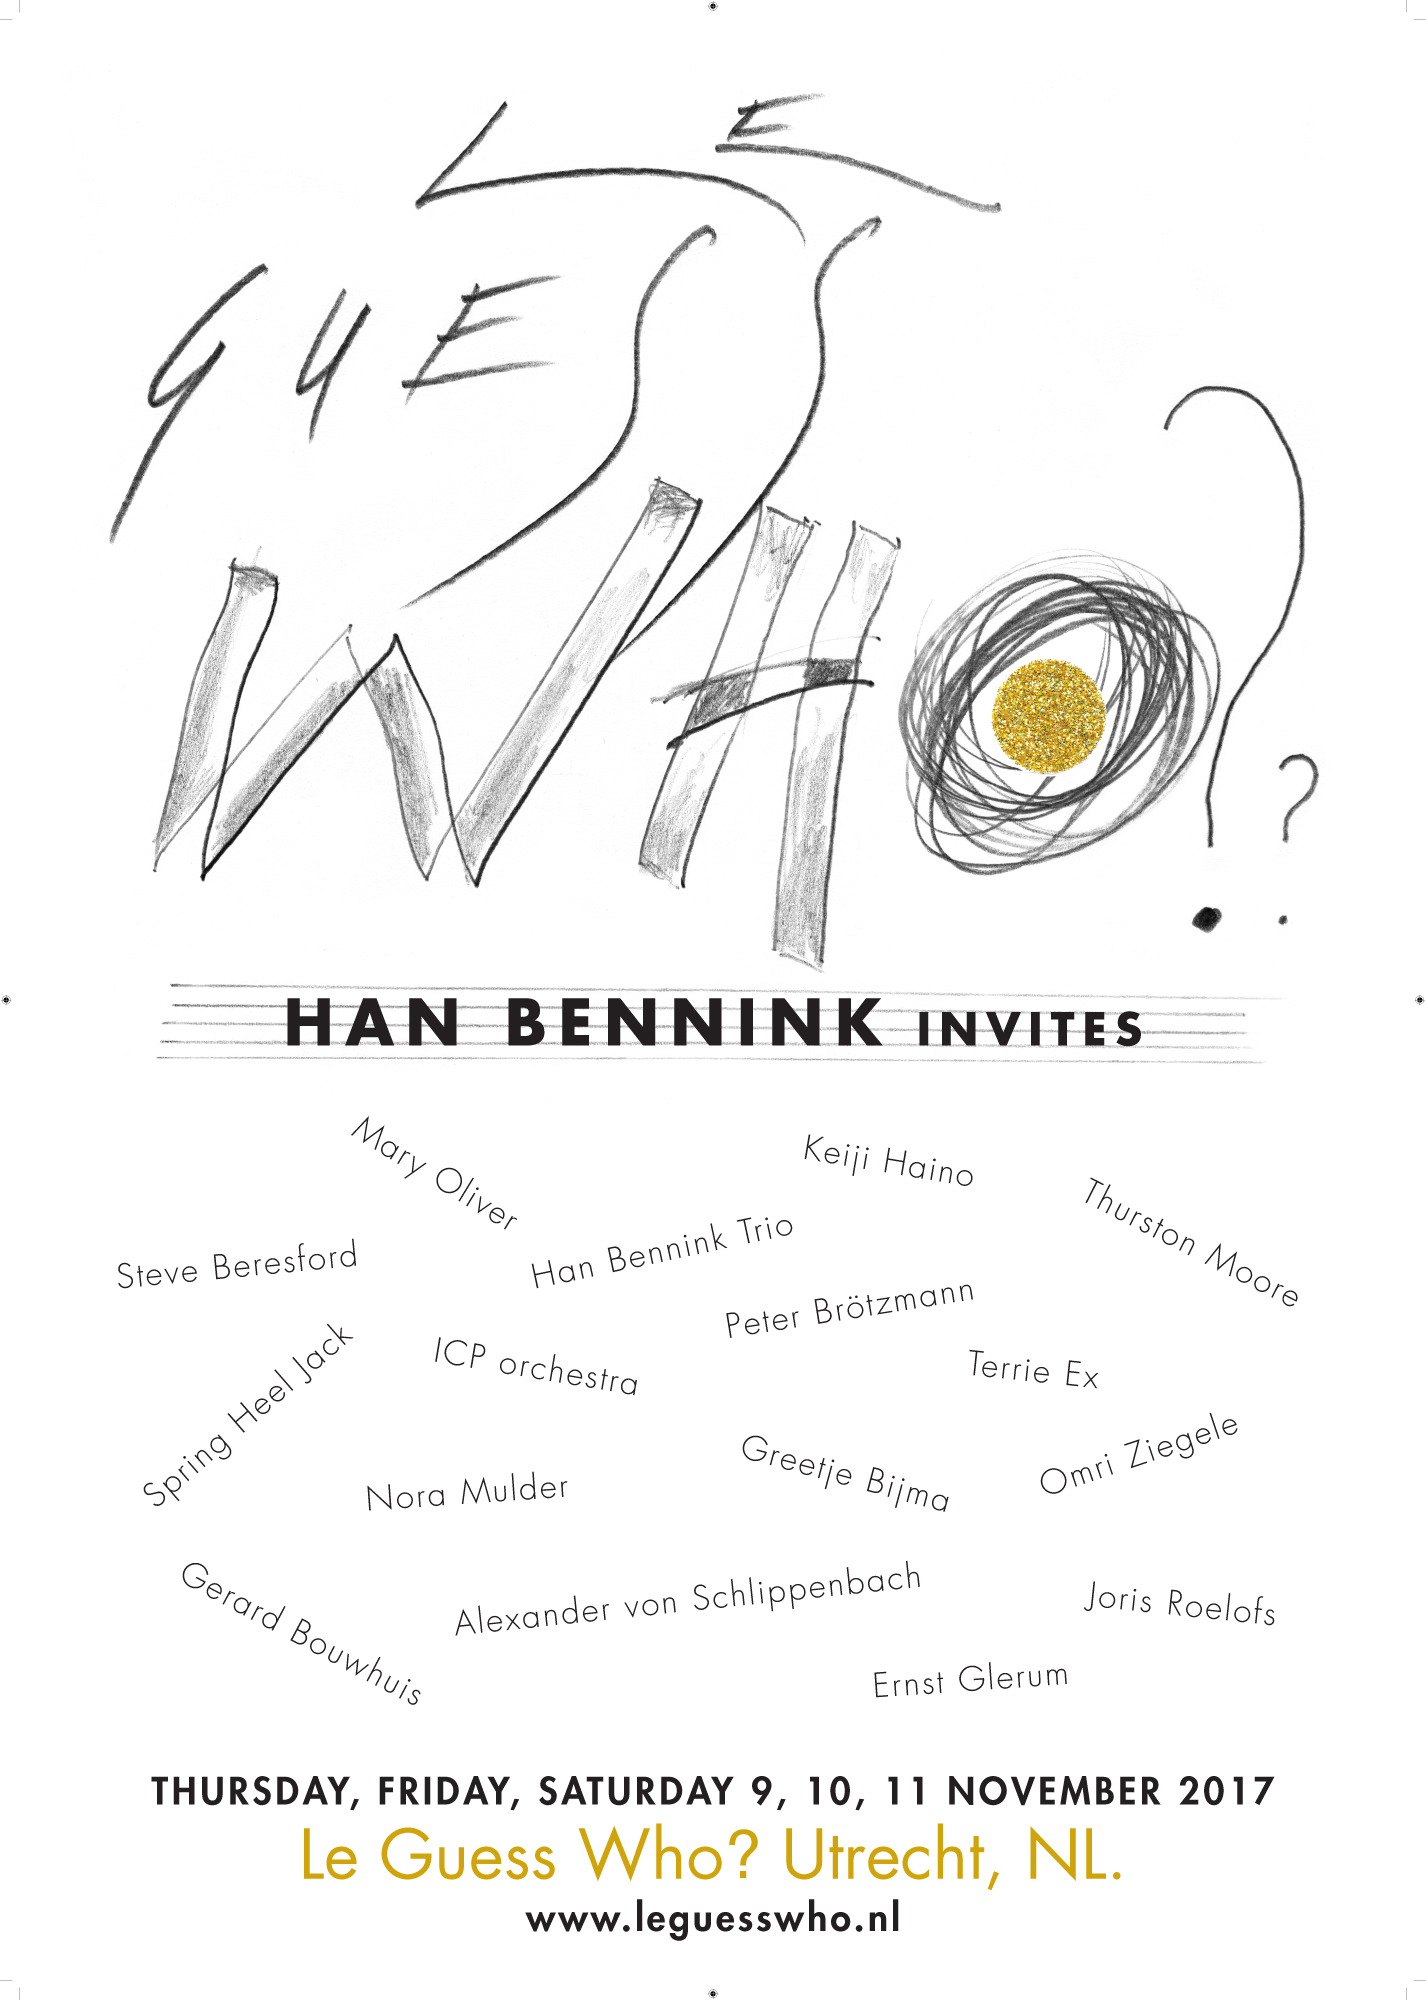 Explore Han Bennink's curated program for Le Guess Who? 2017